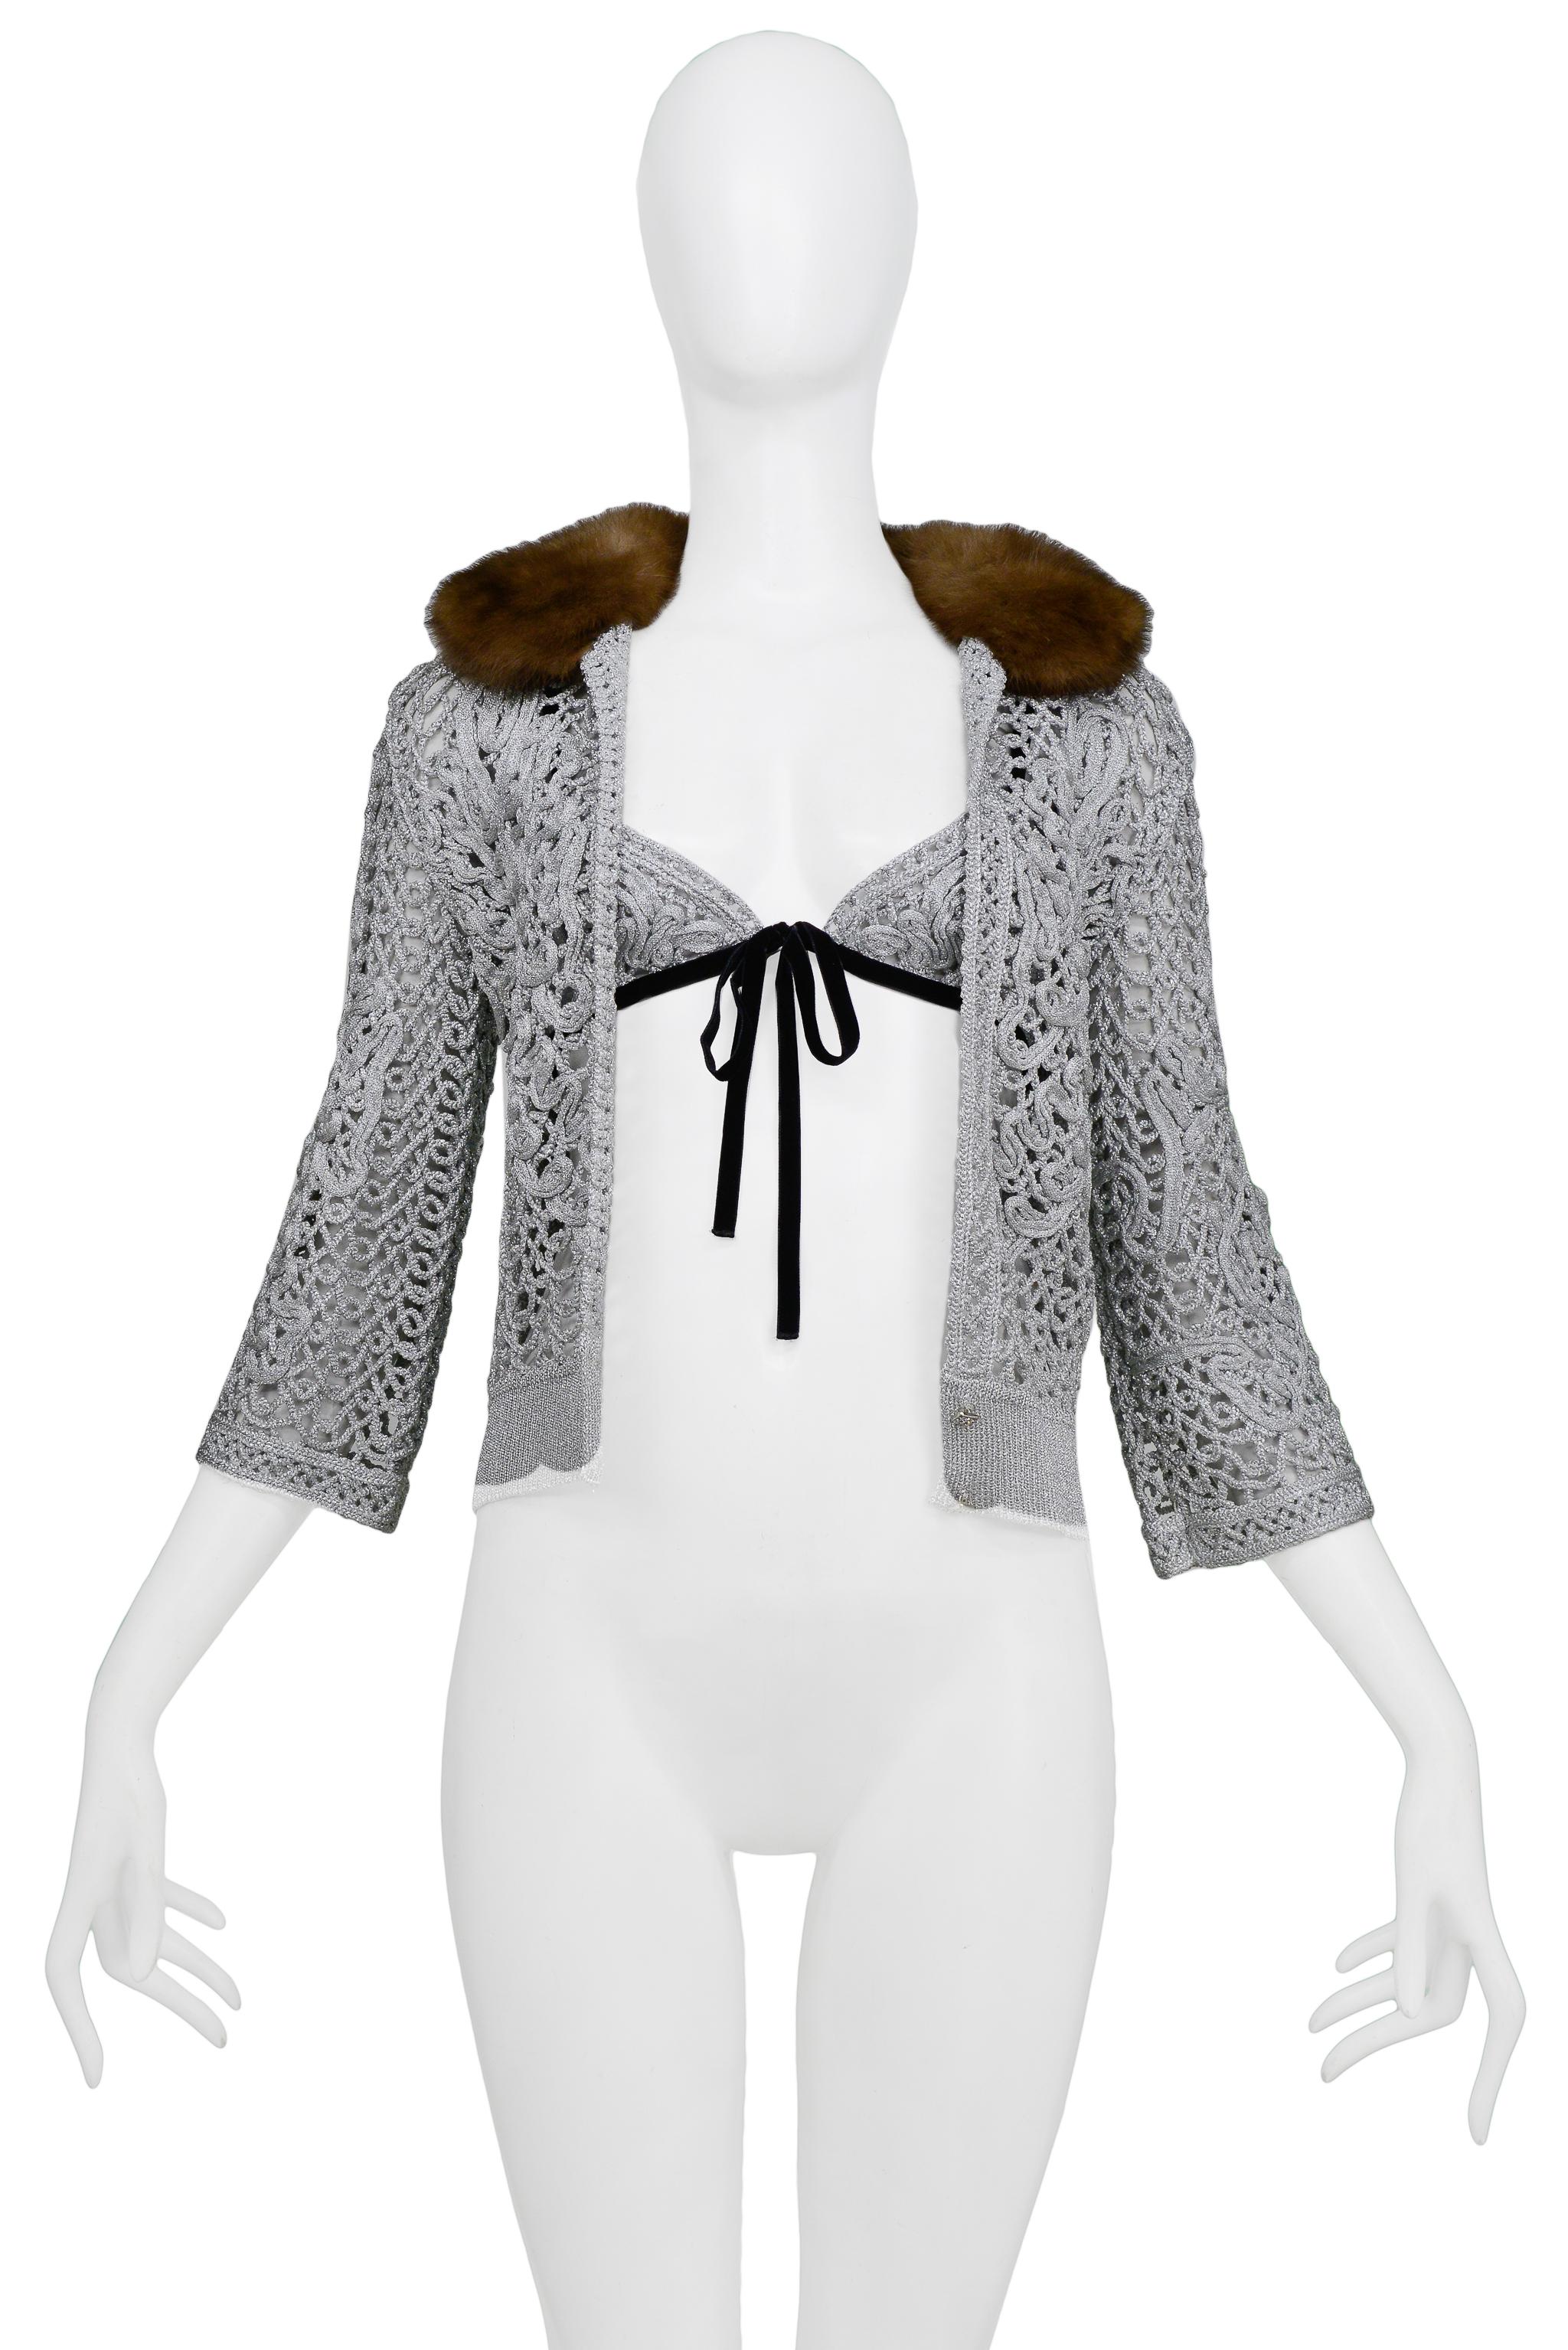 Resurrection is excited to offer a stunning Valentino metallic silver crochet cardigan sweater featuring a luxurious brown fur collar, rhinestone buttons, and a matching triangle bikini top with black velvet ties. 

Valentino
Size Medium
66% Cupro,